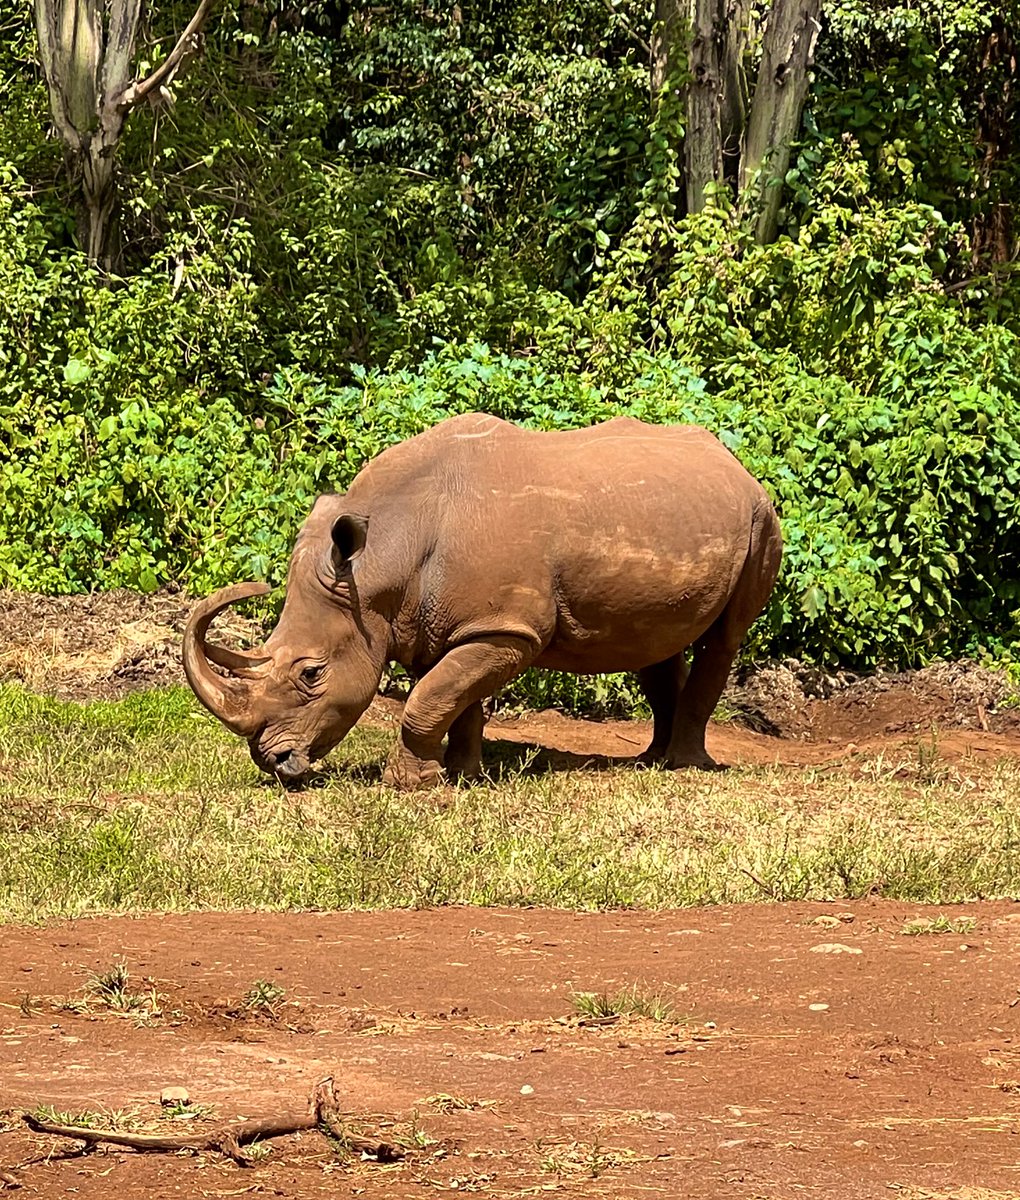 Today we say goodbye to Kenya after an energizing visit discussing satellite data 🛰, agriculture 🌽, & machine learning 🤖 with @SpaceAgencyKE, @kemucie from @icpac_igad, @MumbaMusondam from @UNDP, and @RCMRD_. We managed to make a few new animal friends too! 🦏🦒@HarvestProgram